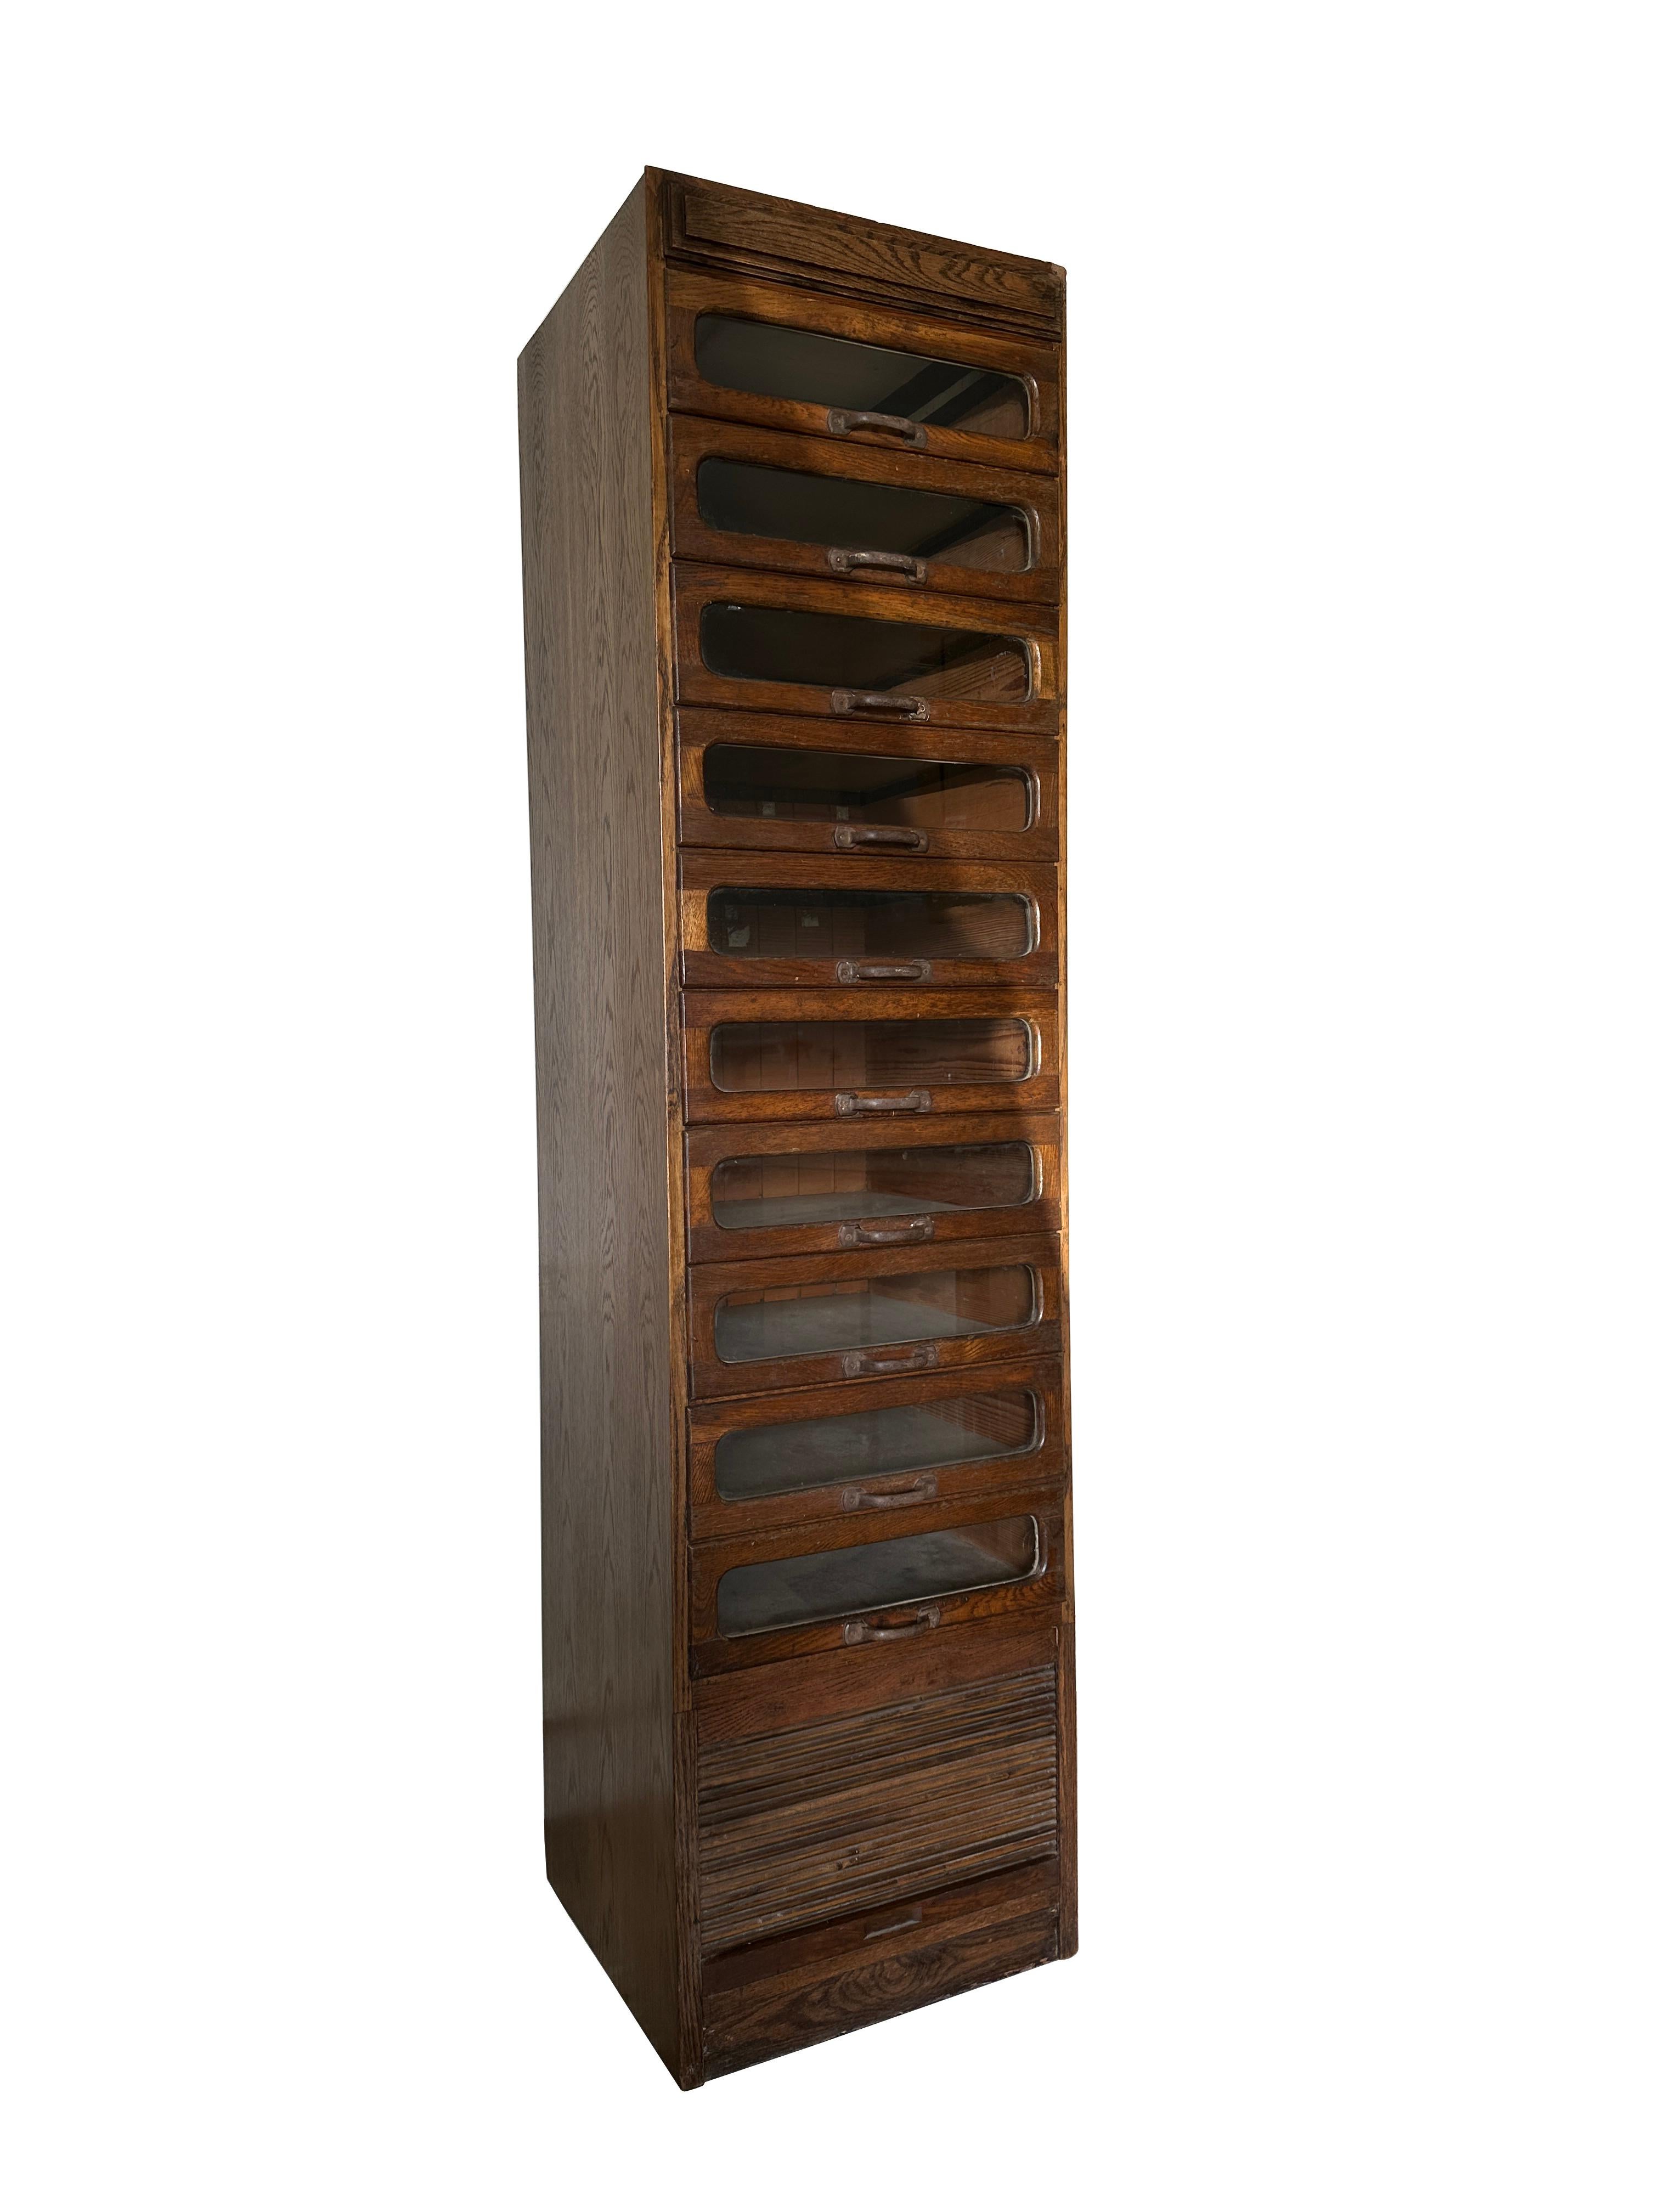 British Vintage Antique Industrial Haberdashery Glass Display Cabinet Chest of Drawers For Sale